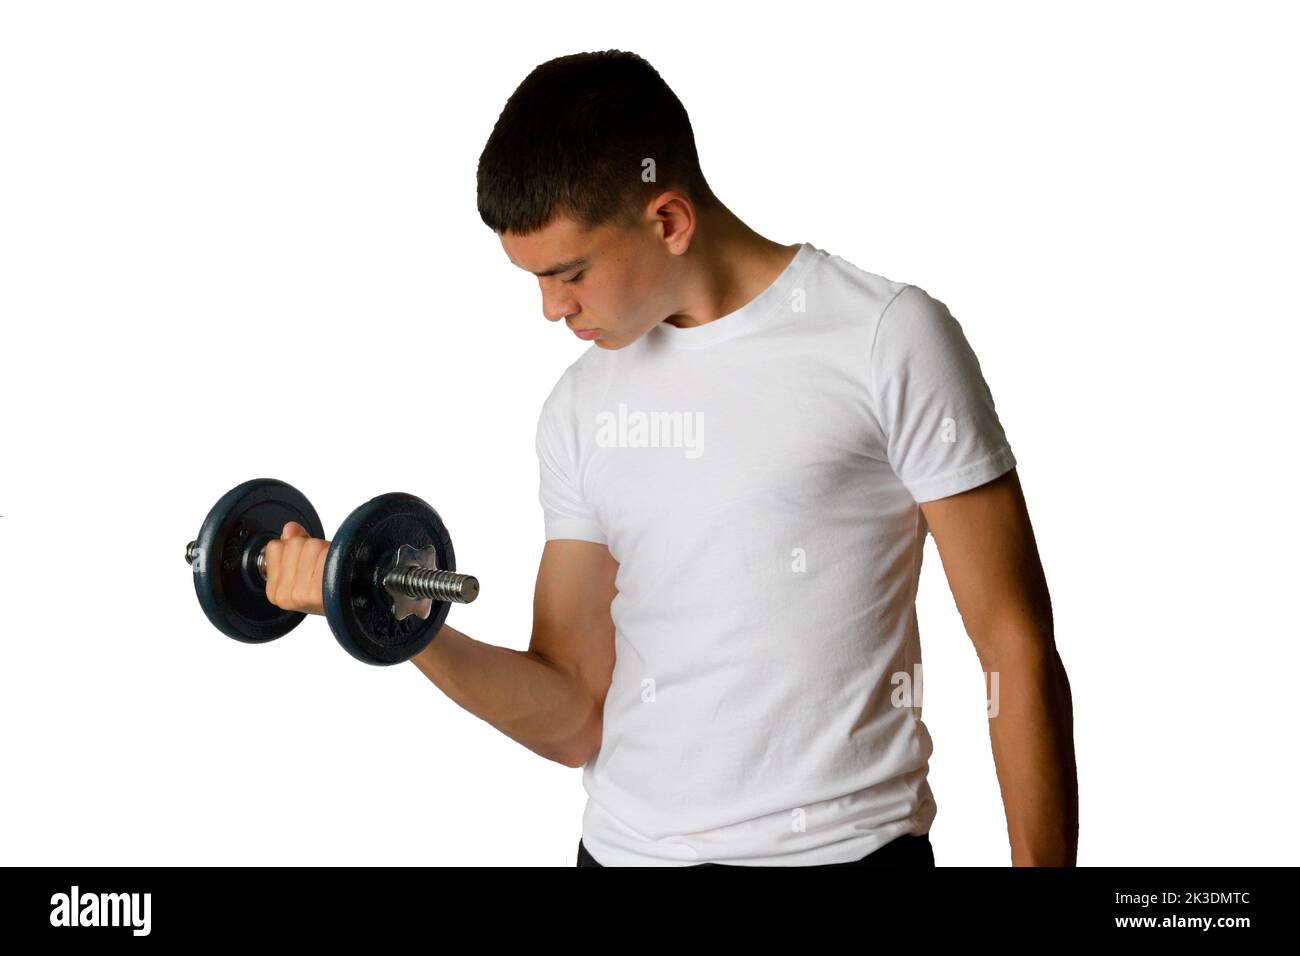 A 19 year old teenage boy lifting a dumbbell Stock Photo